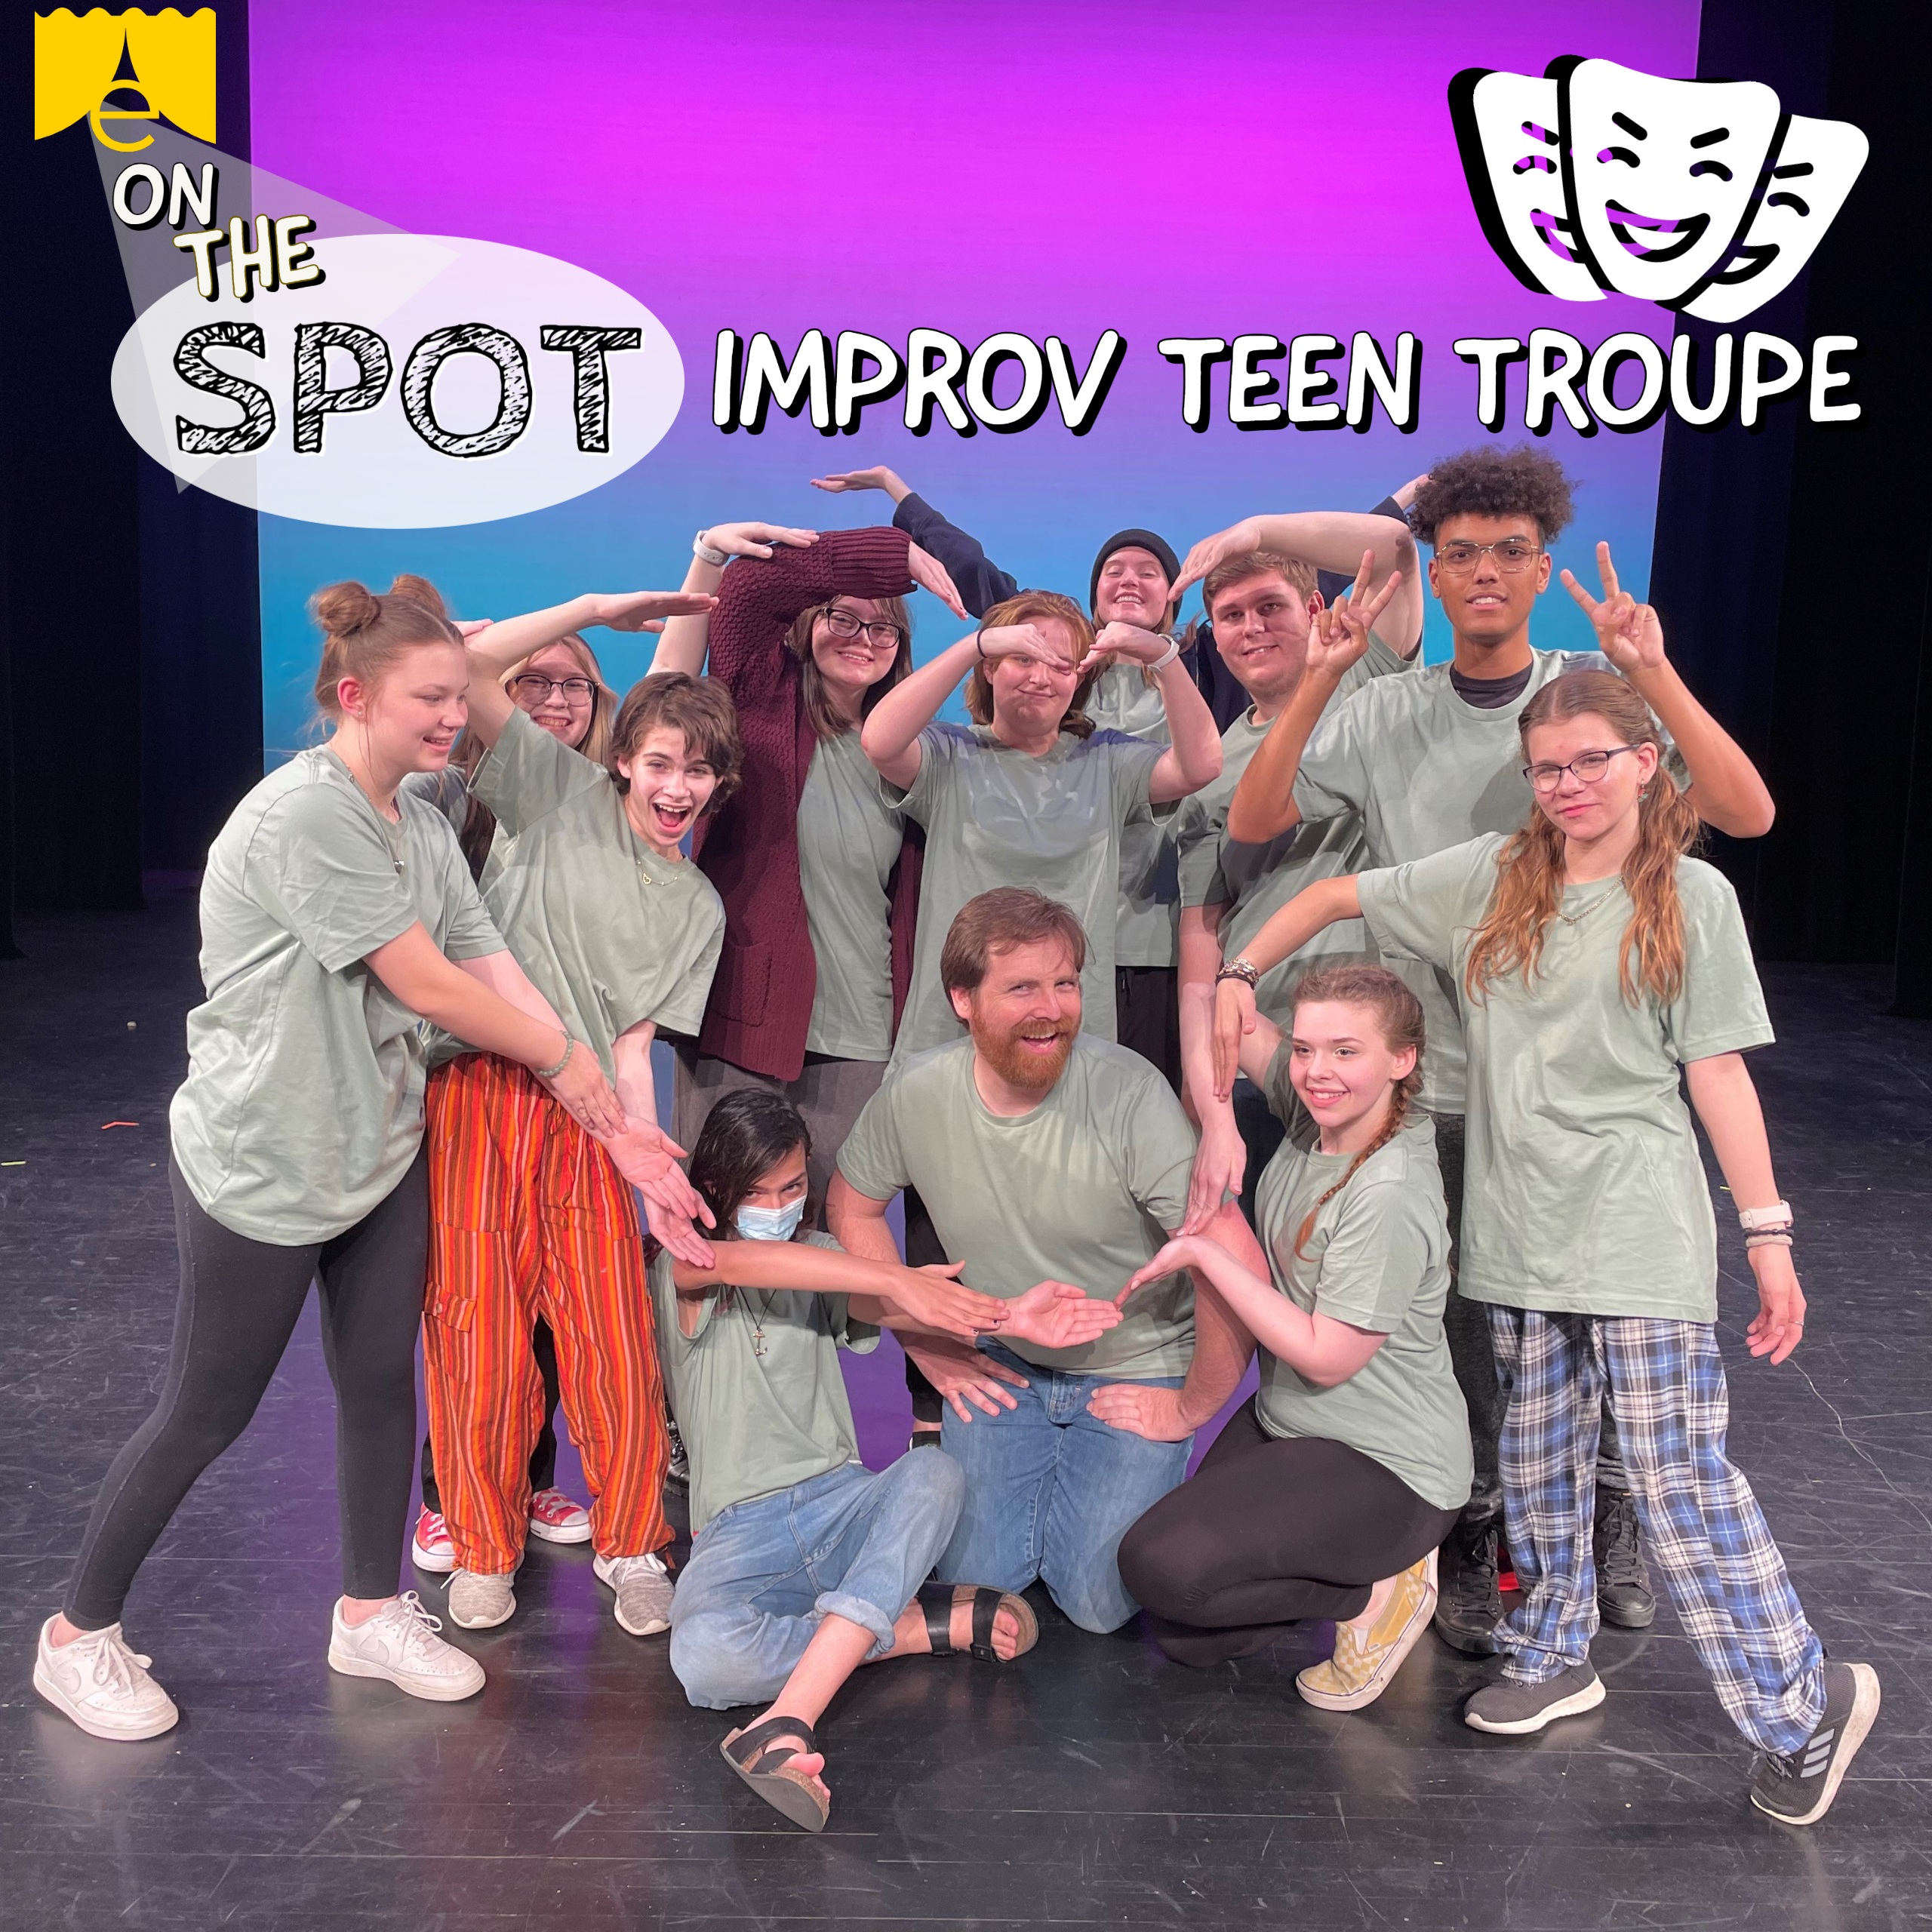 On The Spot Improve Teen Troupe